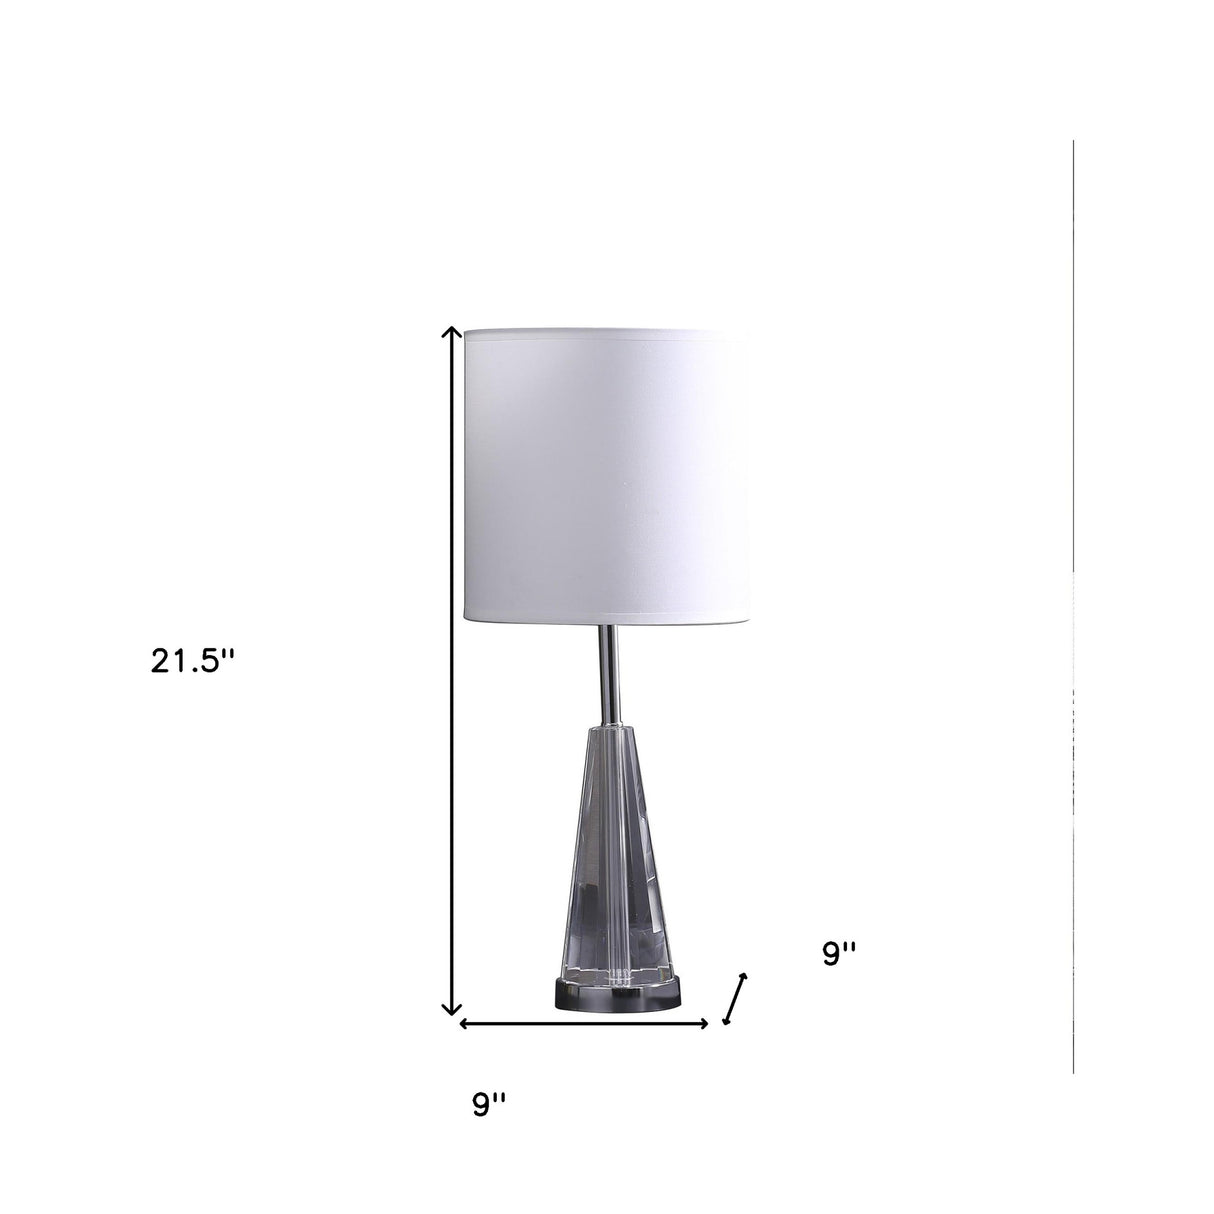 22" Silver Bedside Table Lamp With White Drum Shade